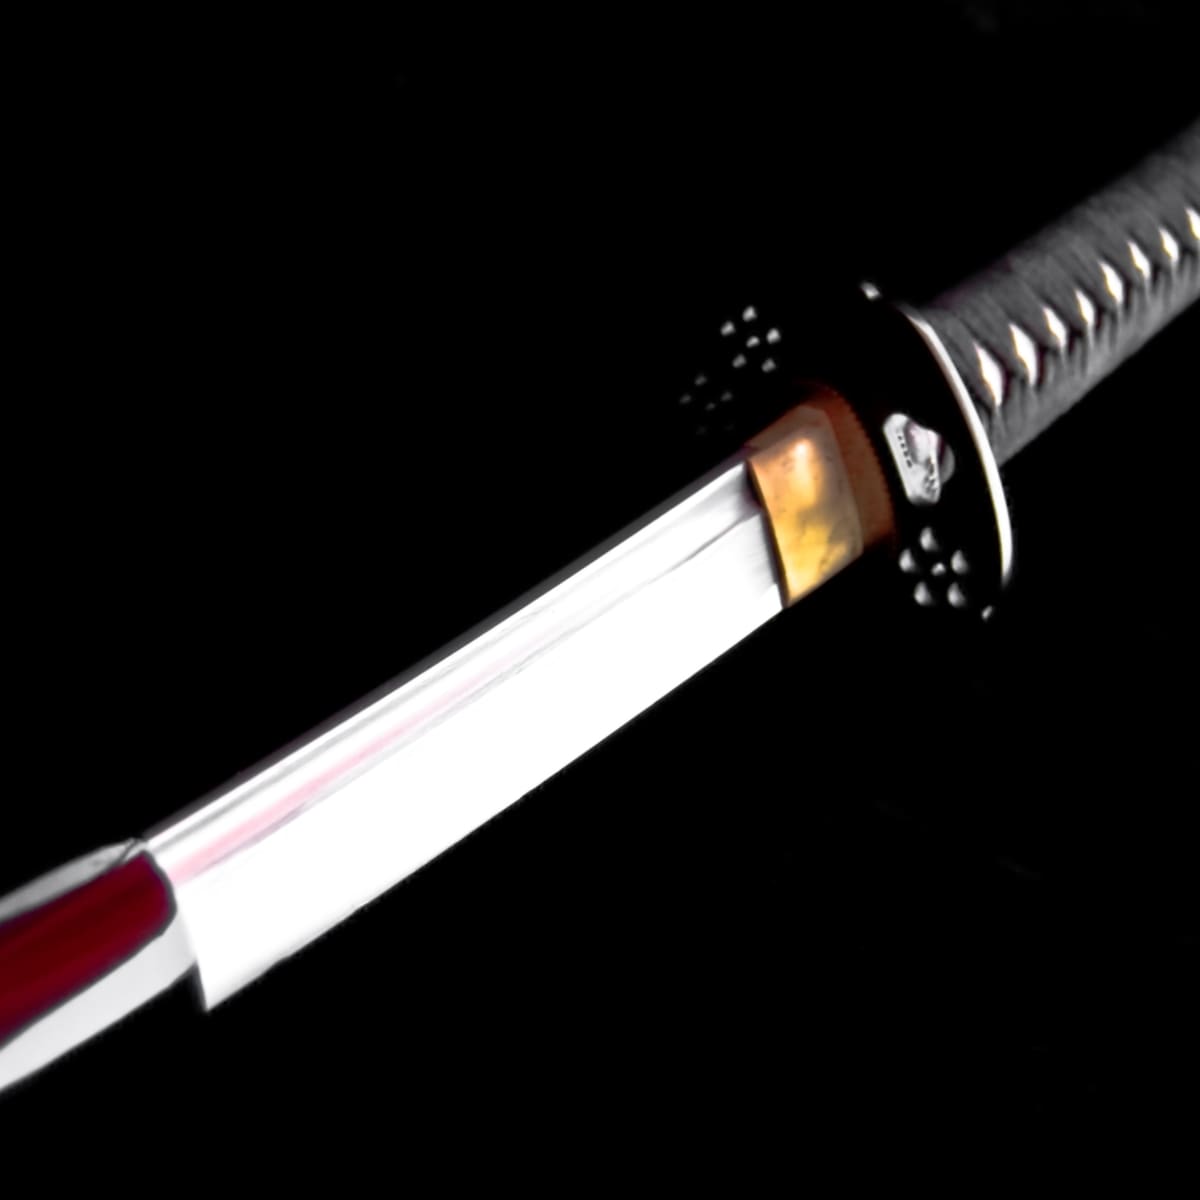 What is the sharpest blade or sword (weapon) in the world